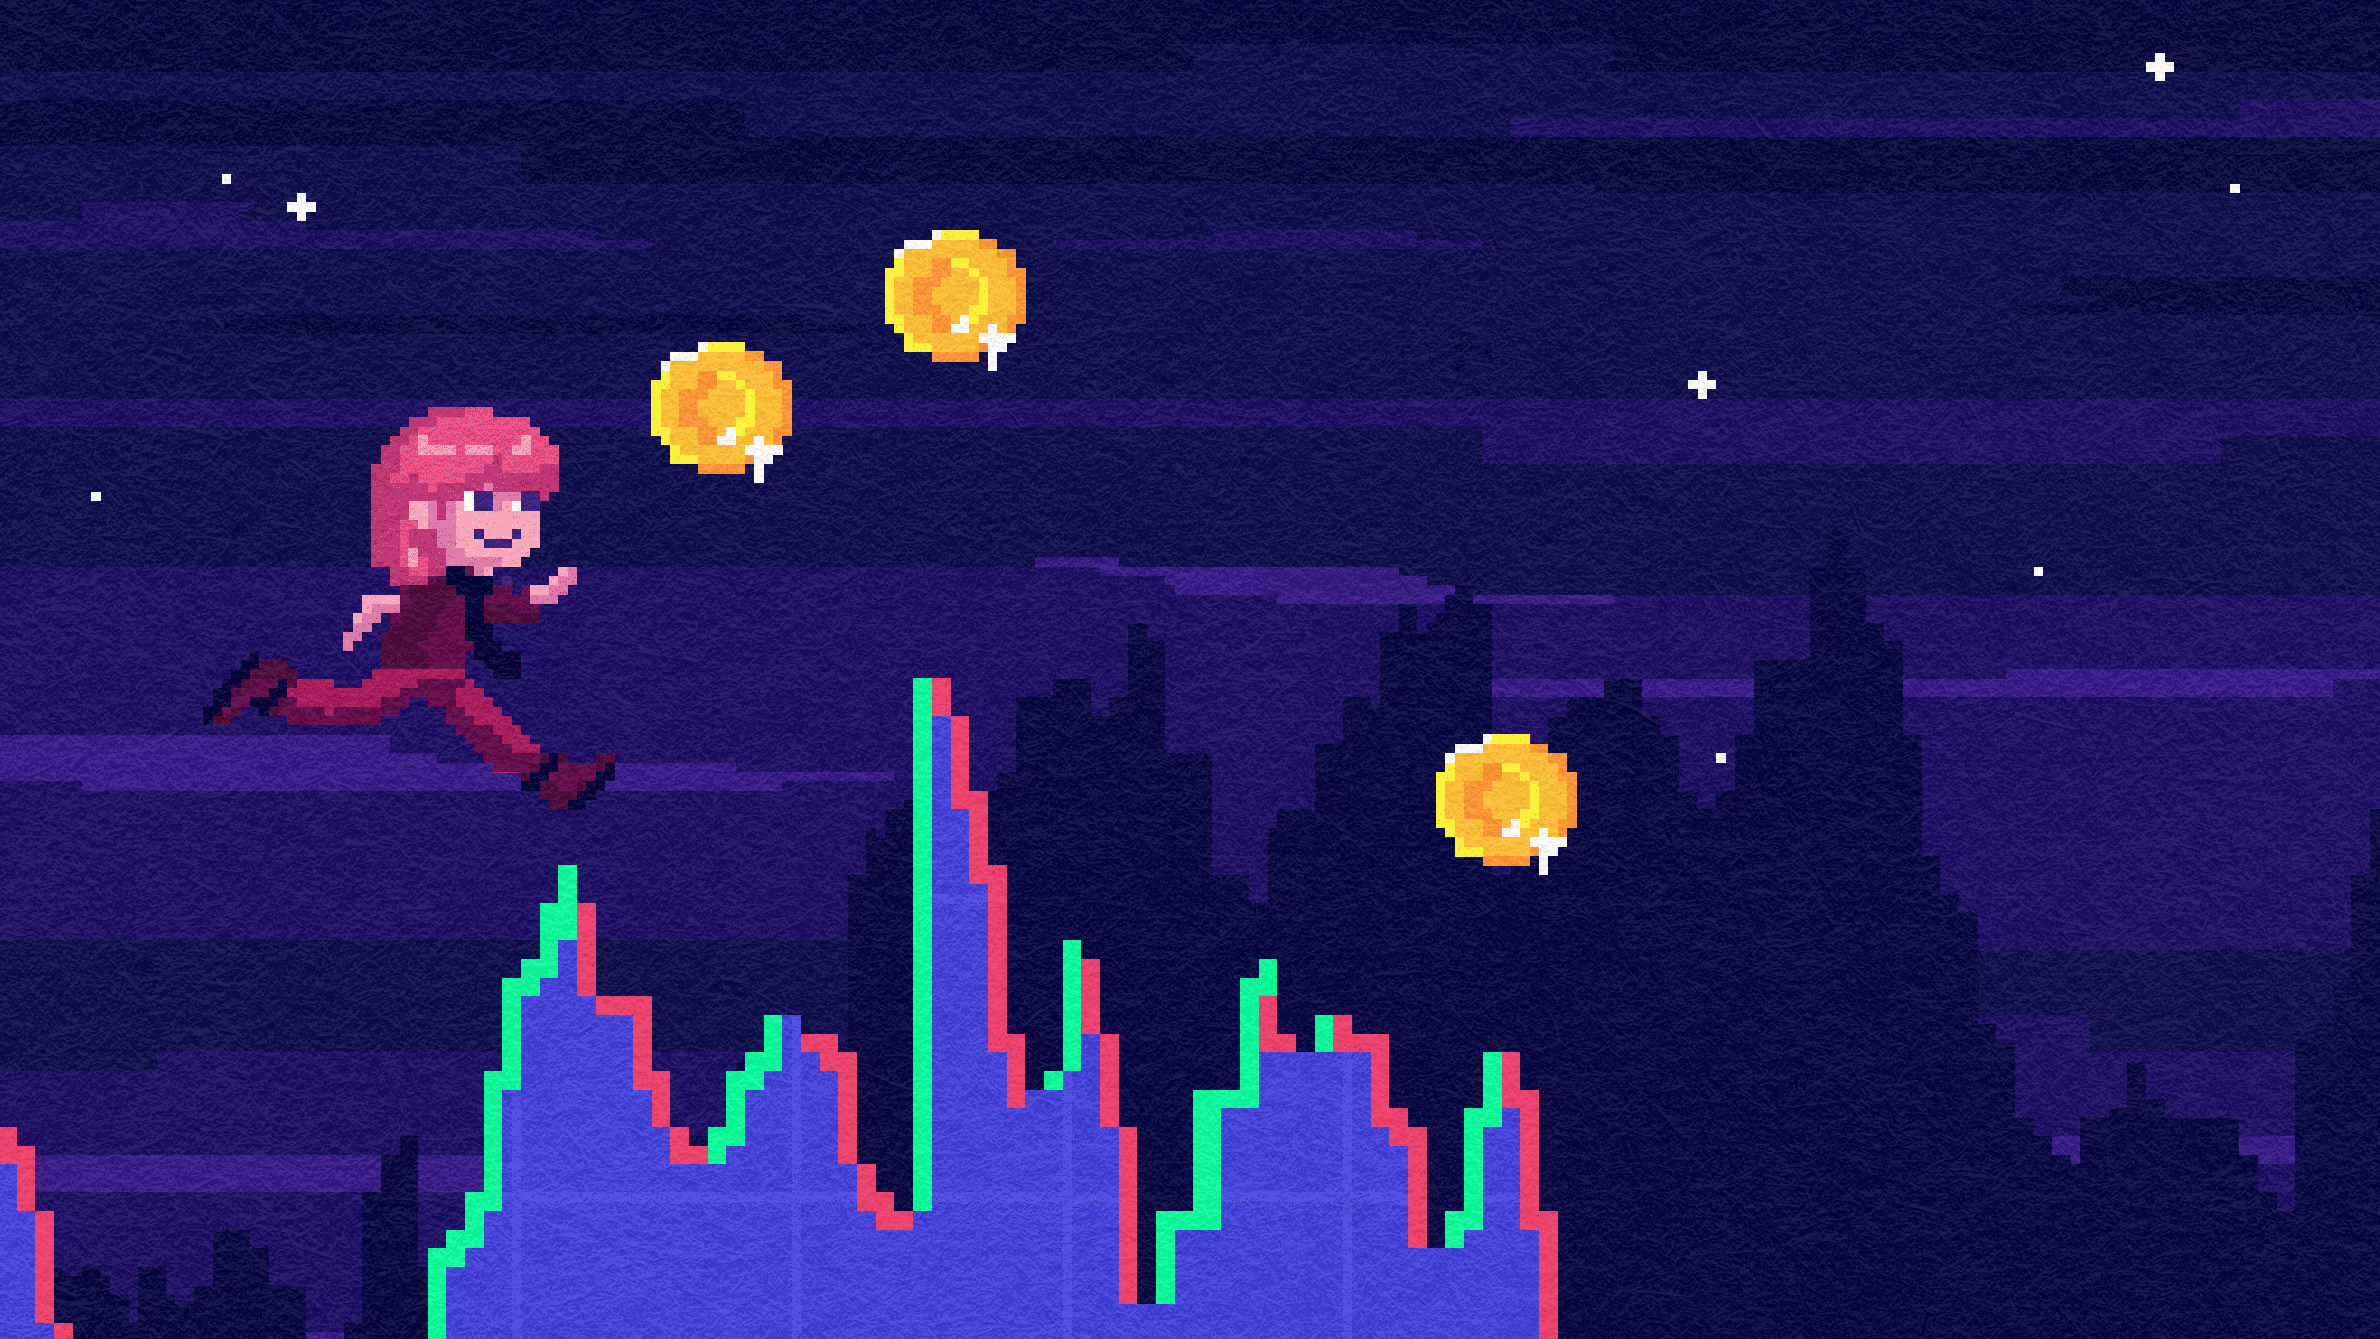 Pixel art illustration of a pink-haired character jumping over a stock market chart to collect coins